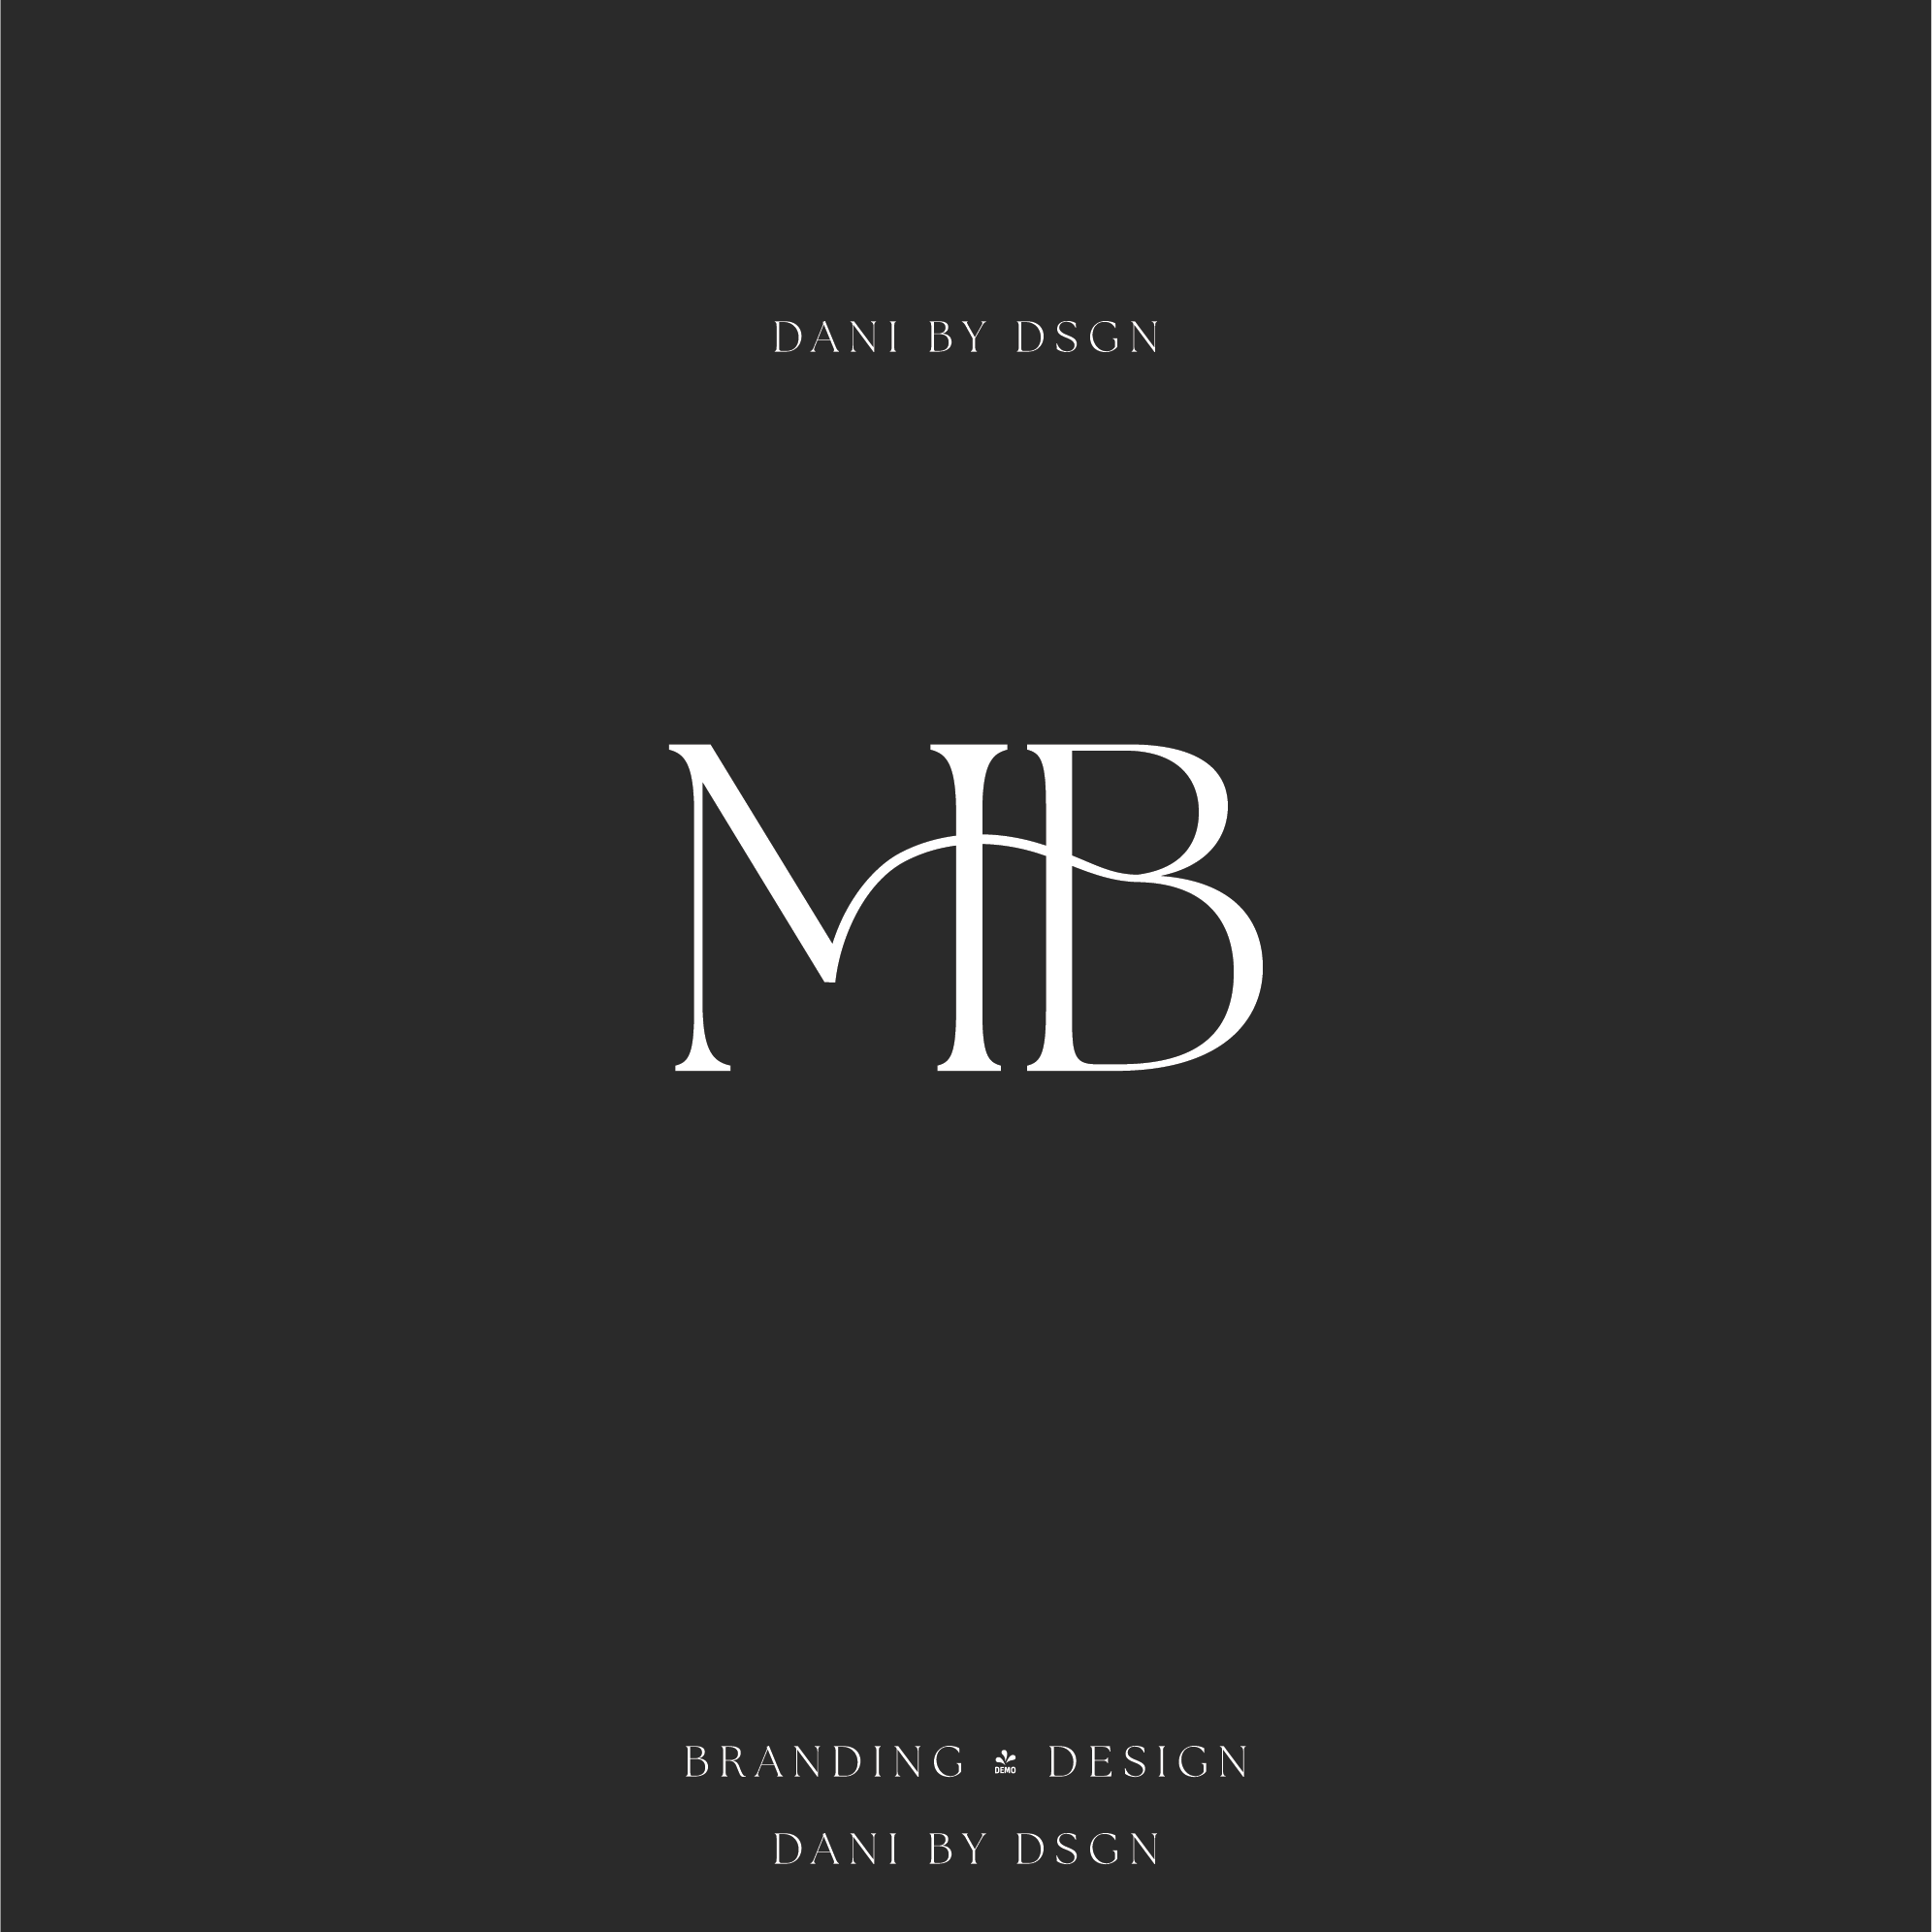 A sophisticated 'MB' initial monogram white on black background design by Danibydsgn, ideal for a range of branding needs such as logo design, personal branding, and monogram customization for special event marketing. This versatile monogram merges the artistry of tattoo design with the elegance required for wedding monograms and high-end clothing branding. It’s a testament to the detailed work of business logo designs that also translates beautifully into body art and wall art